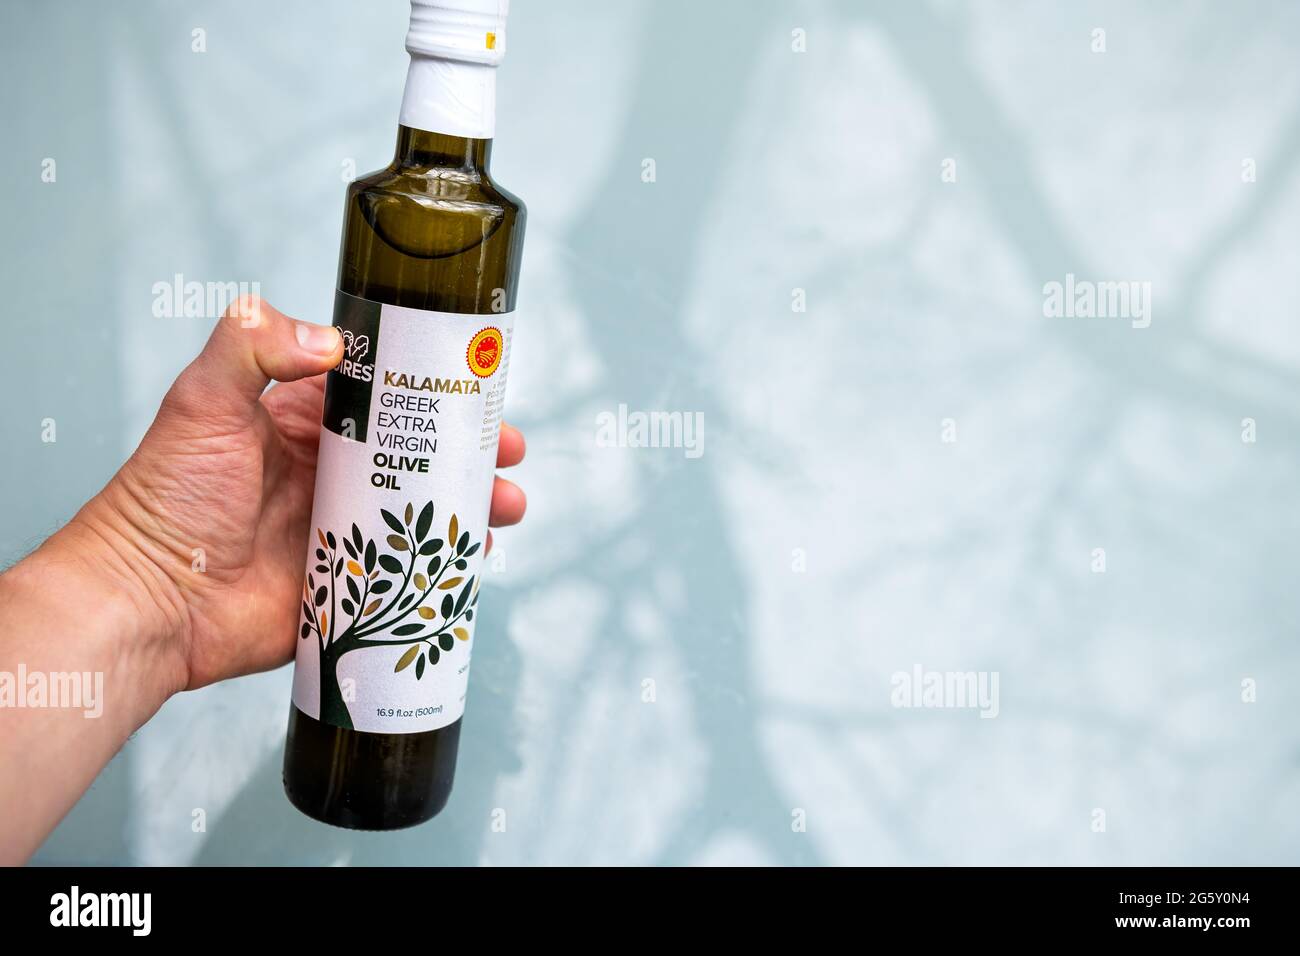 Nellysford, USA - April 29, 2021: Closeup of hand holding Moires PDO Kalamata EVOO Kalamata greek extra virgin olive oil bottle and sign label Stock Photo